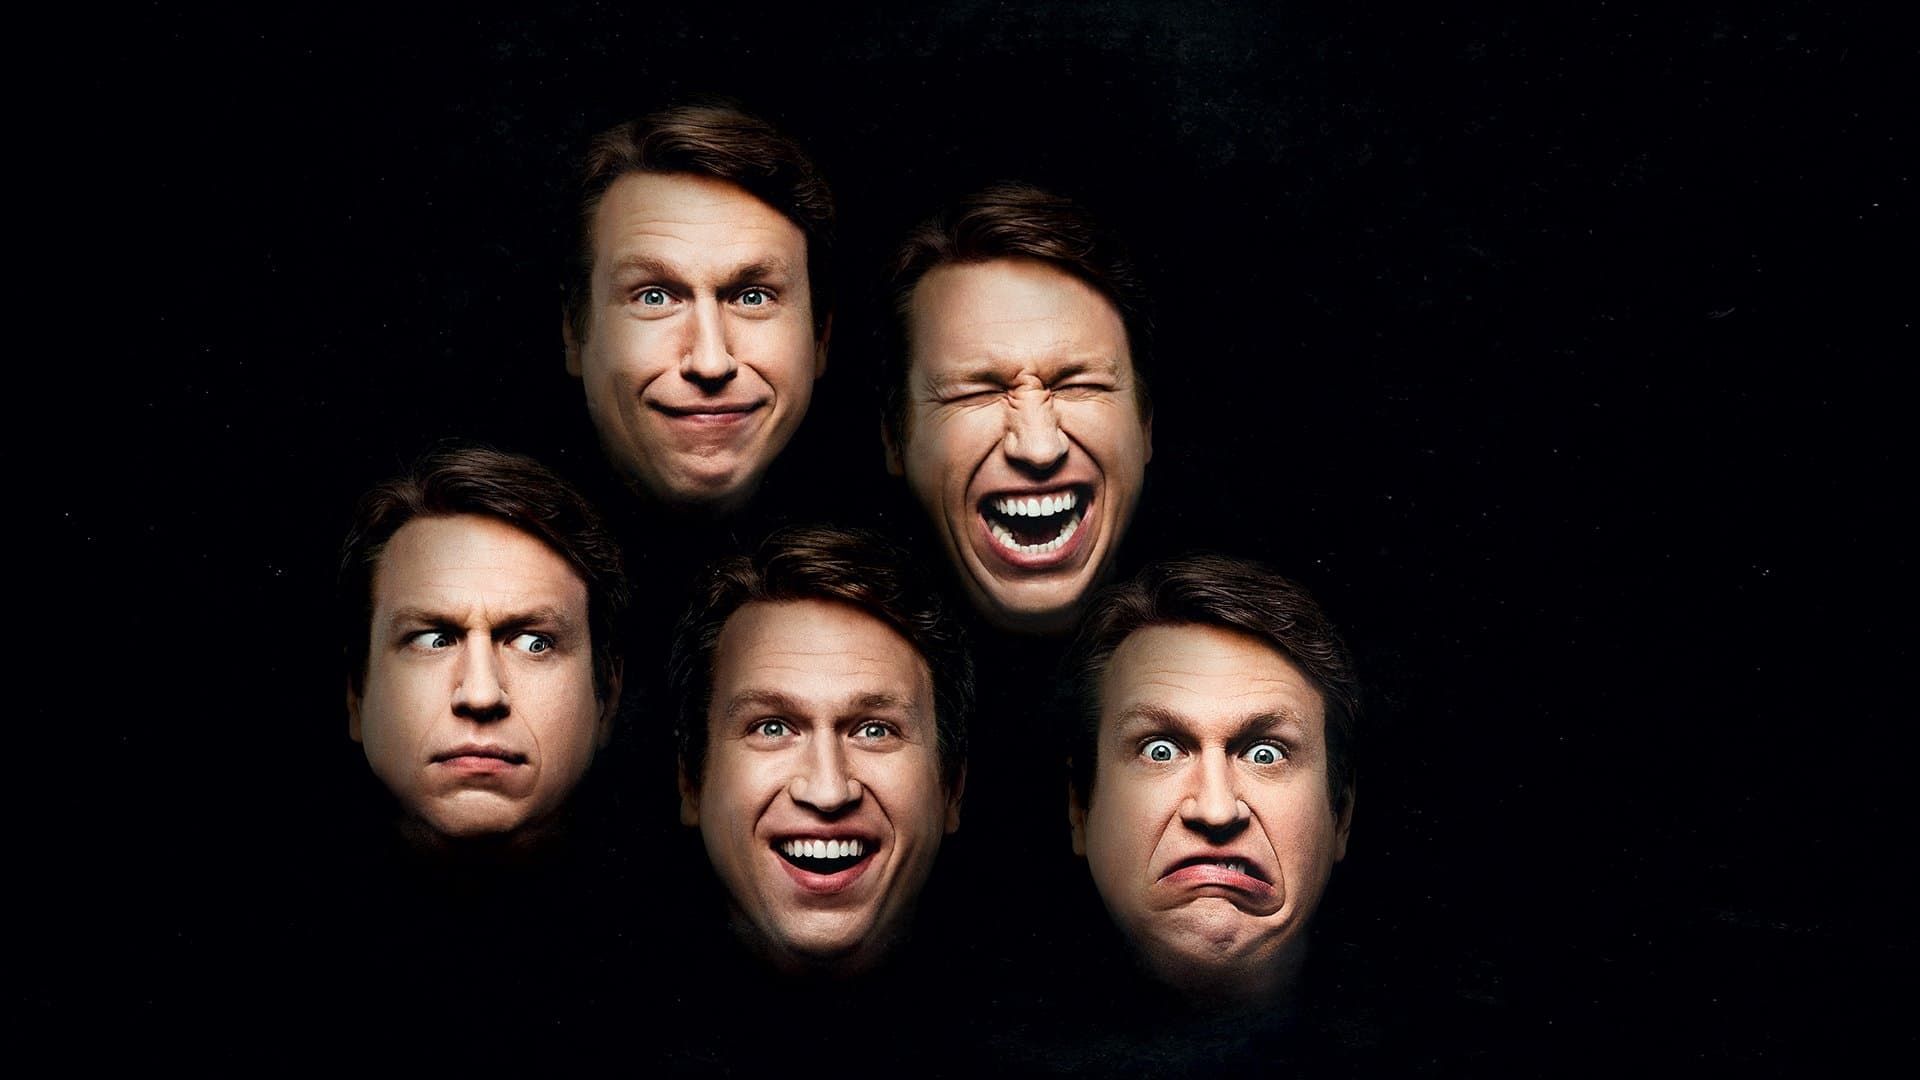 Pete Holmes: Faces and Sounds background